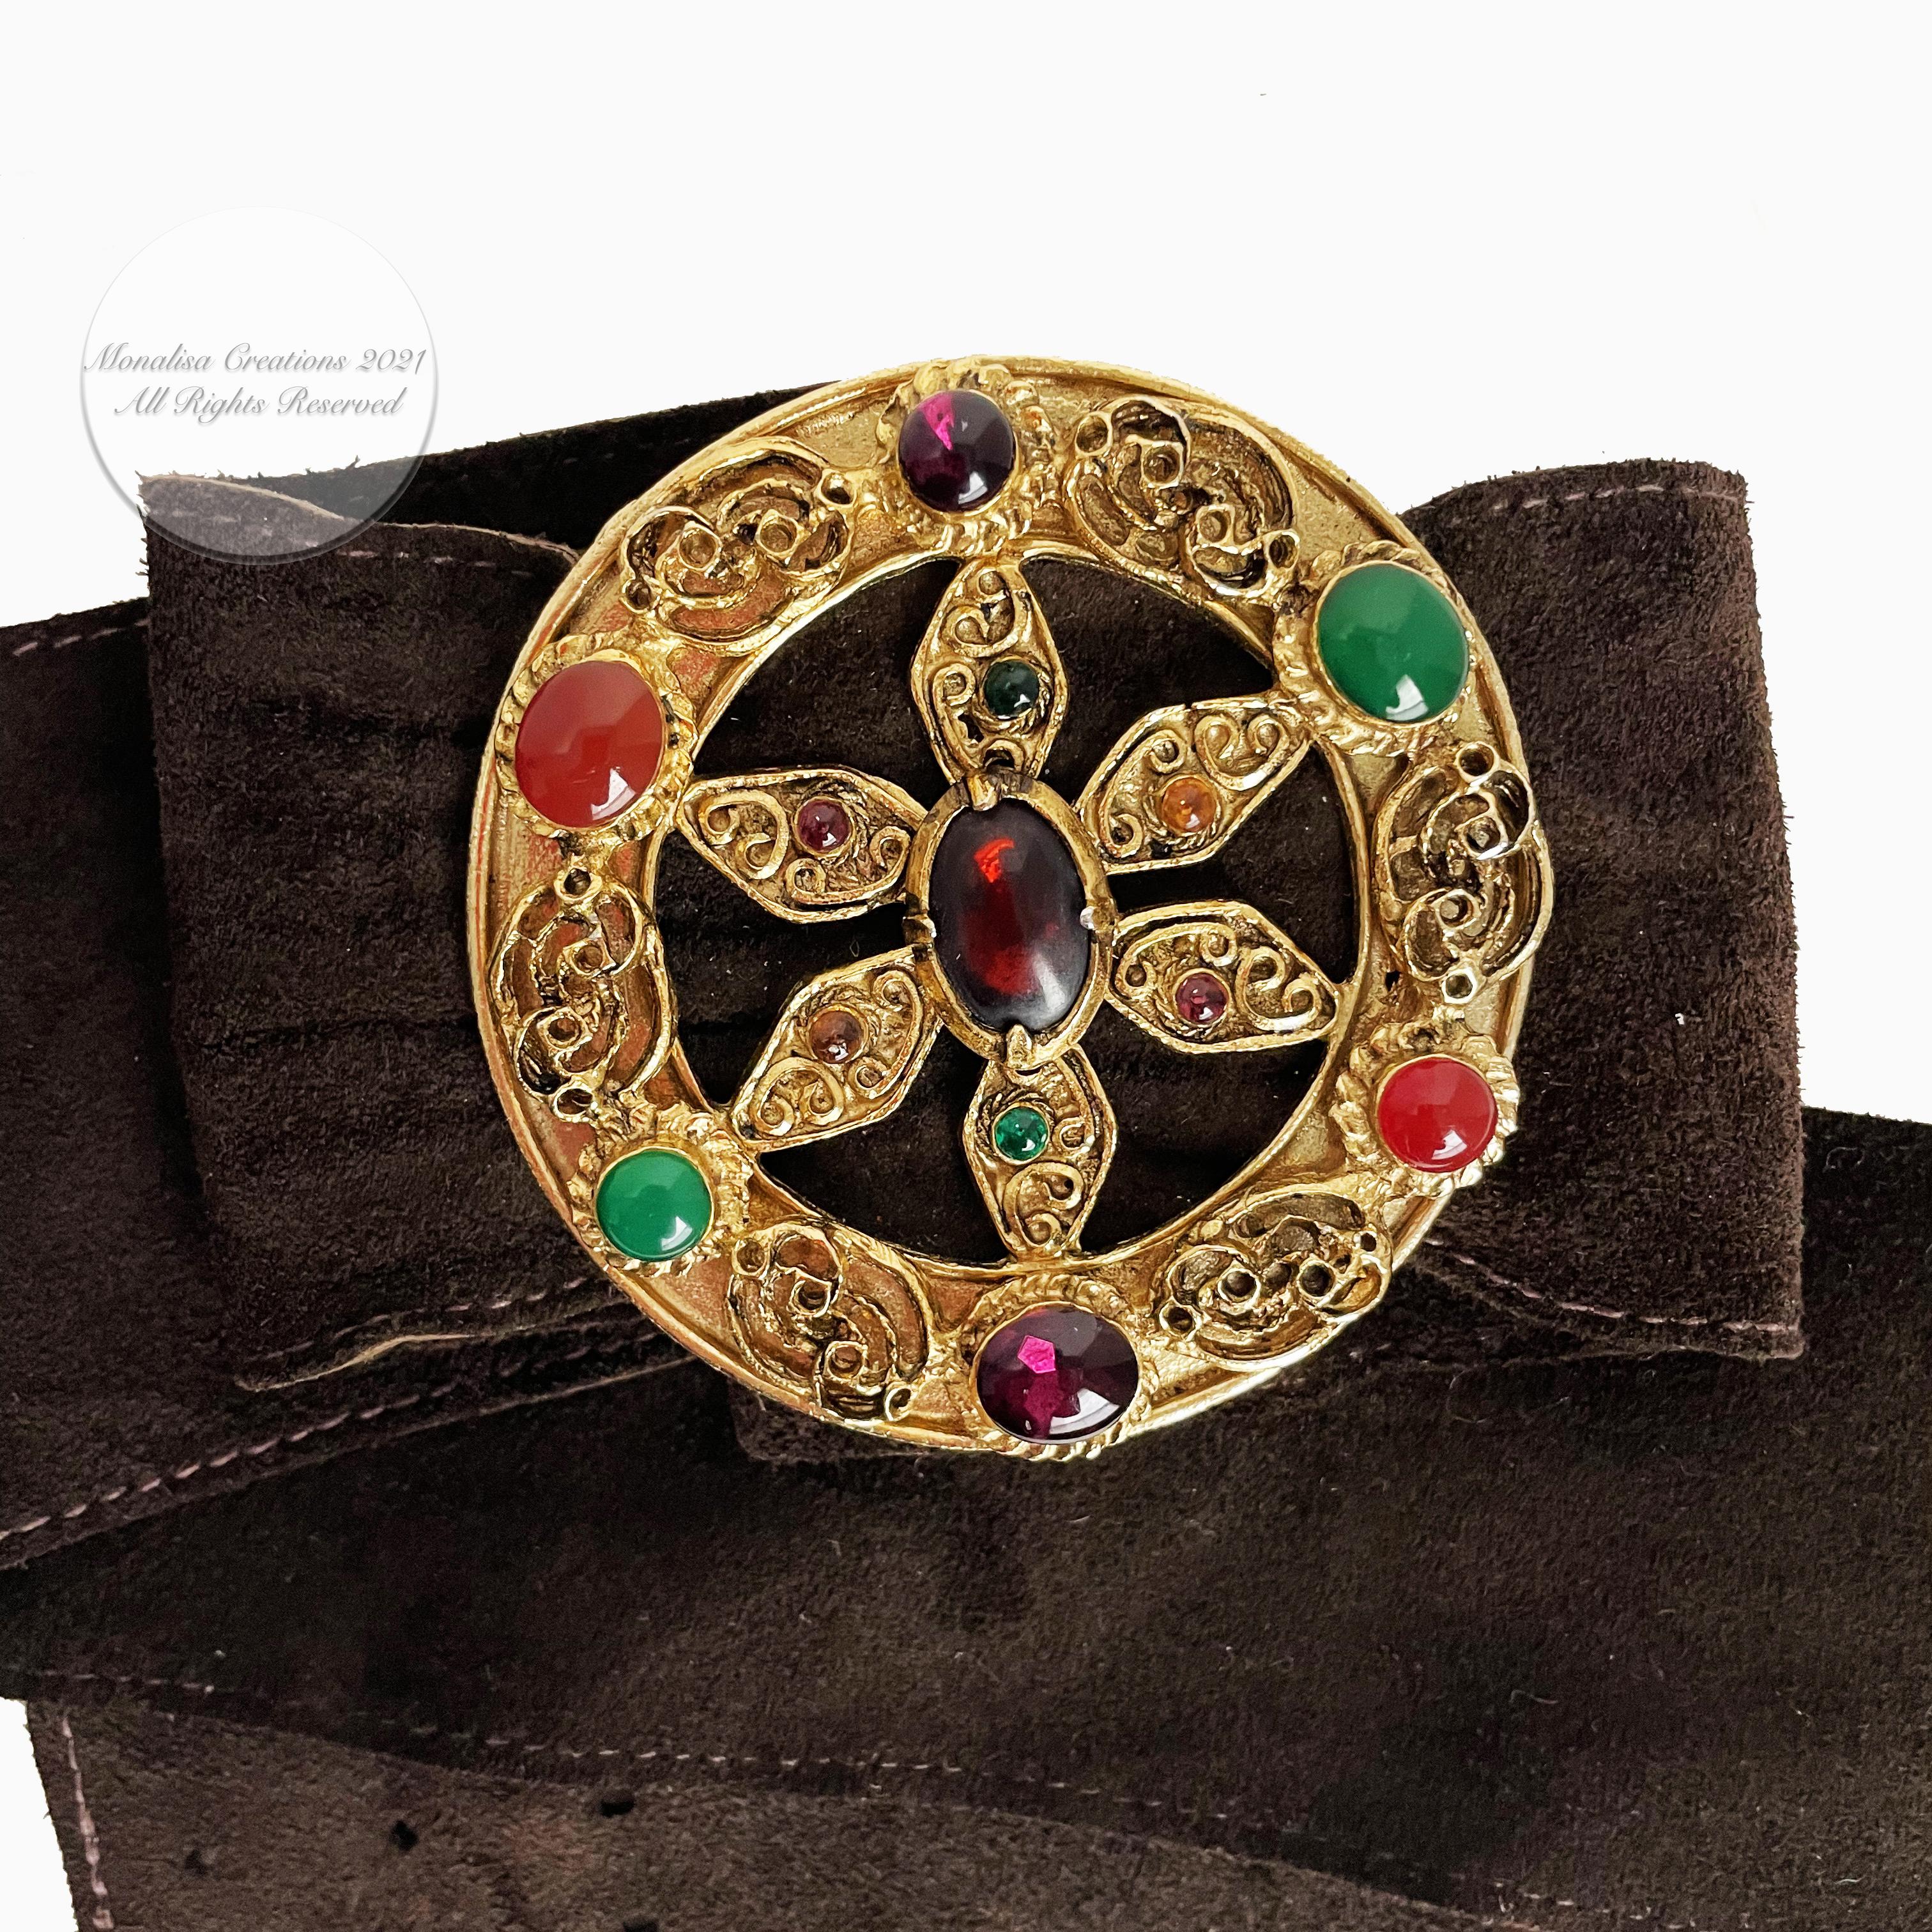 Yves Saint Laurent Belt Colorful Glass Cabochons Buckle Suede Leather 70s S/M 2